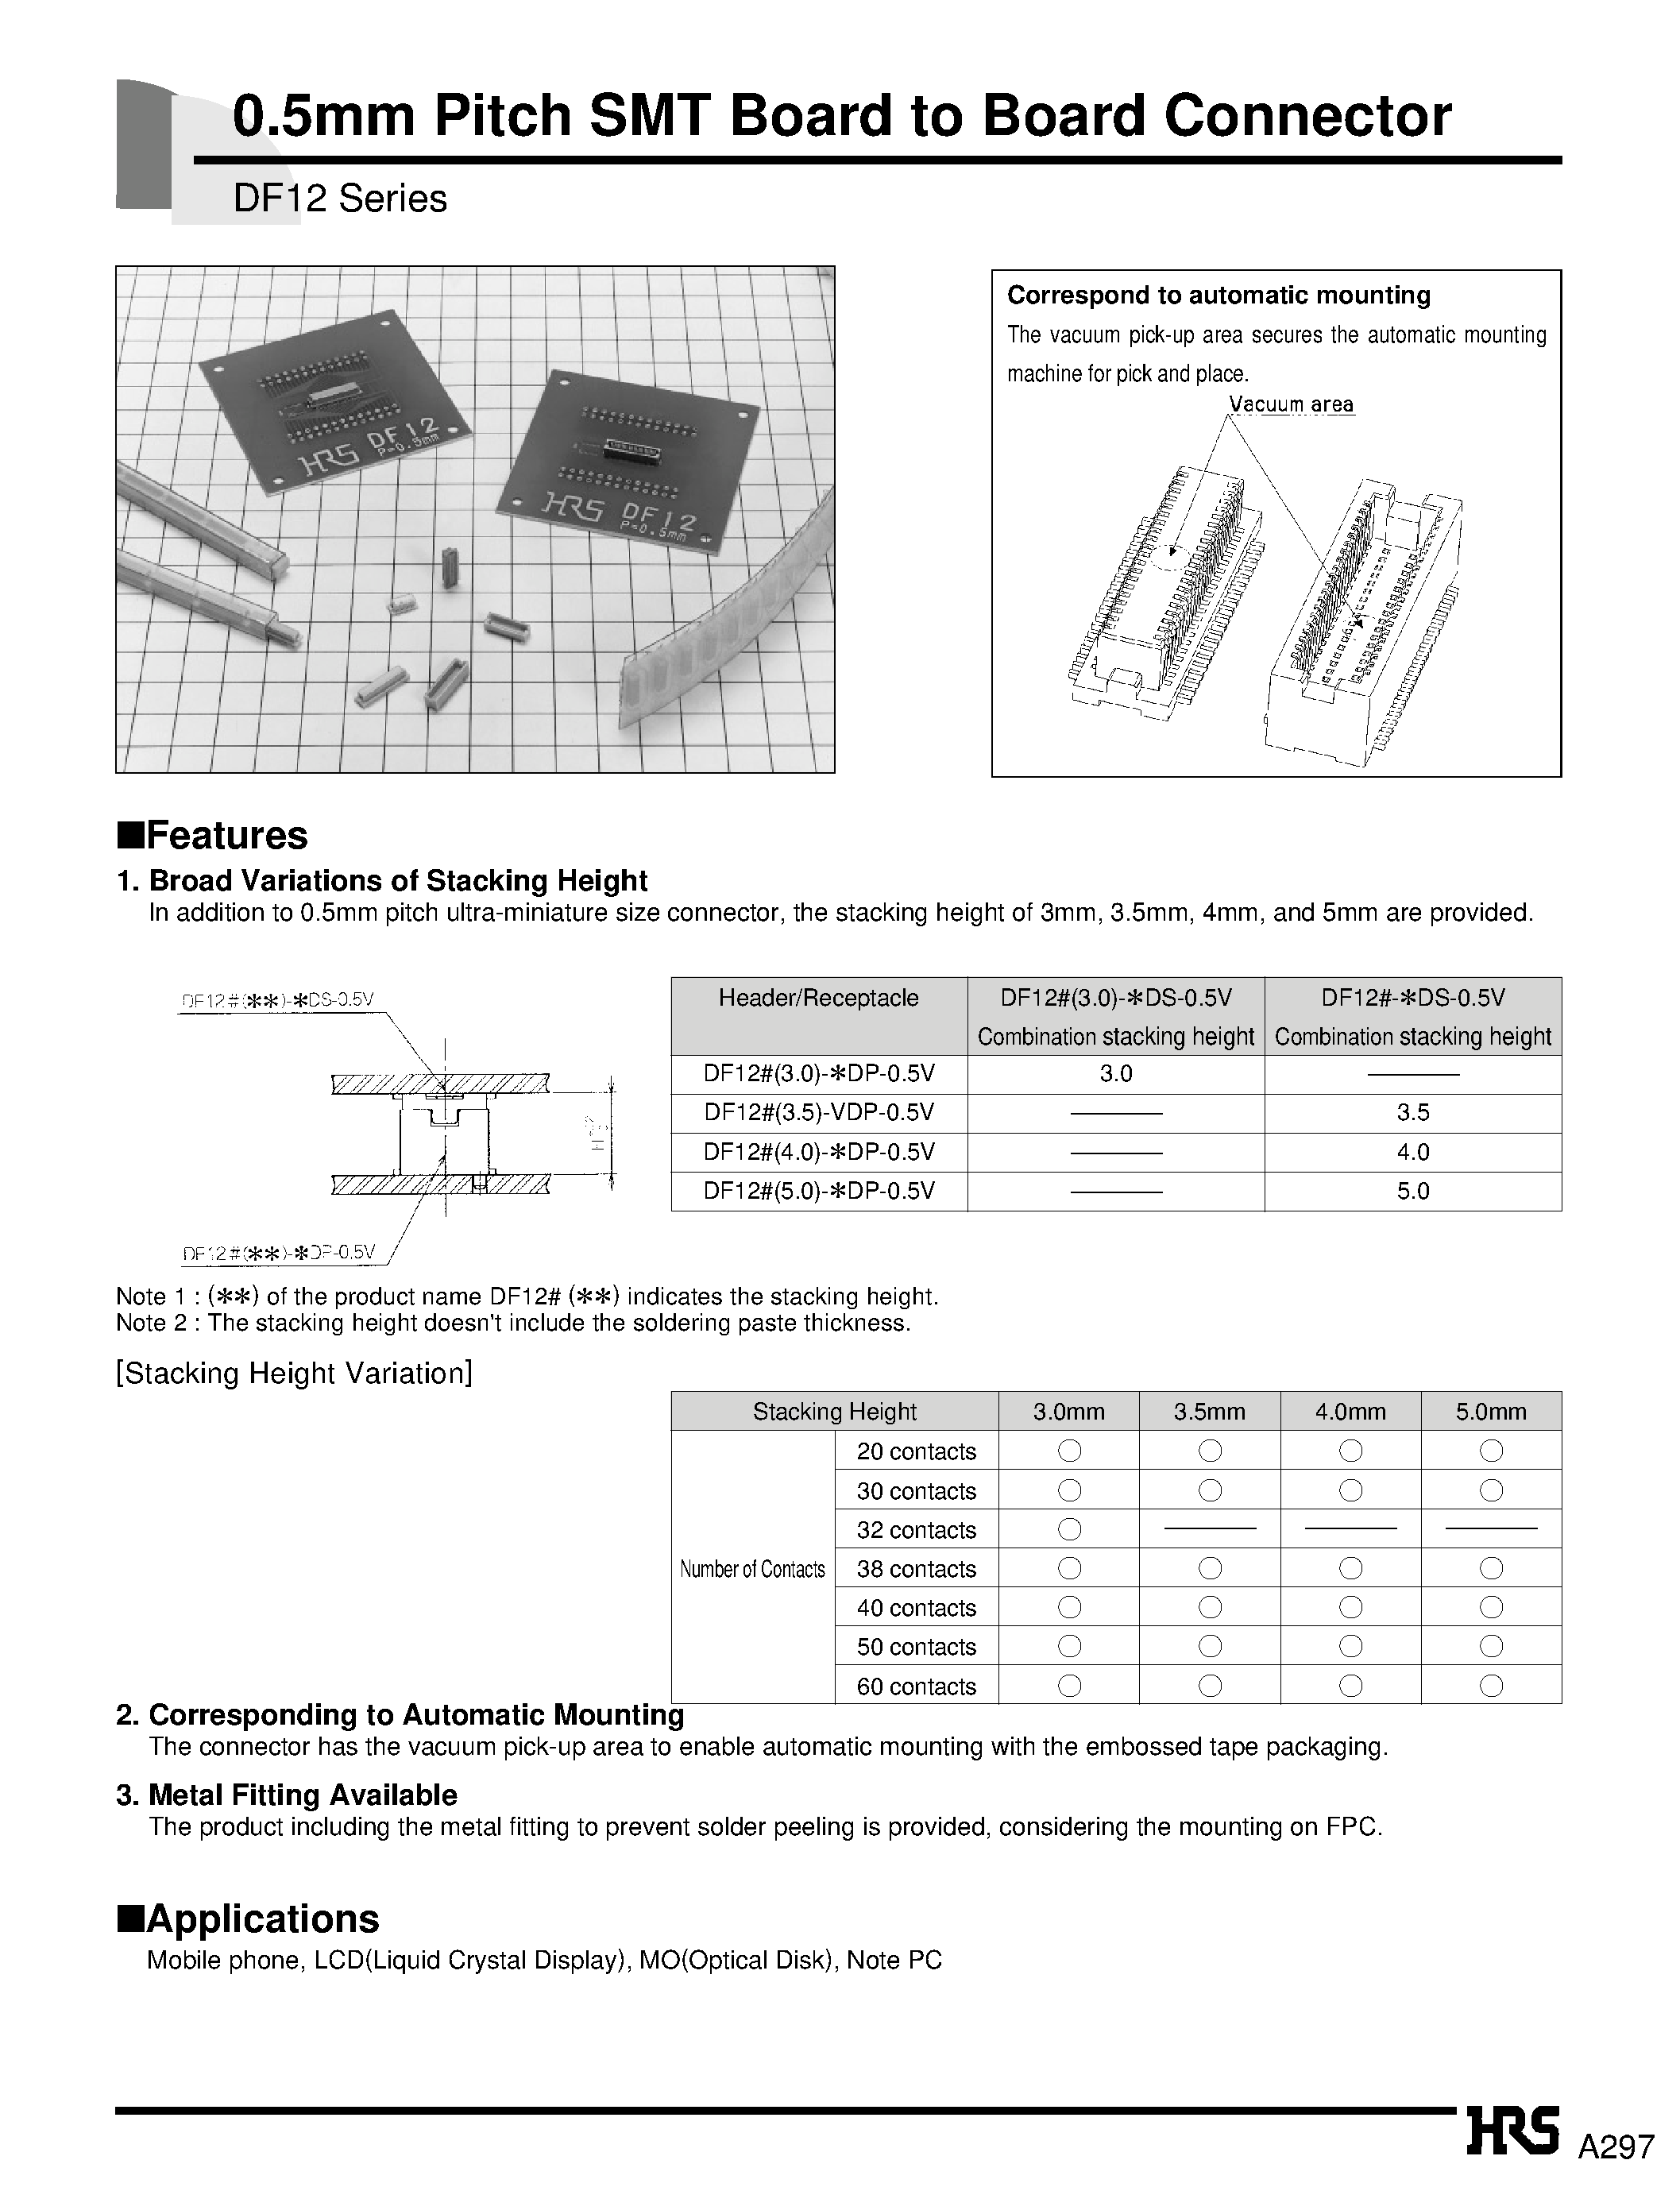 Datasheet DF12A-20DP-0.5V - 0.5mm Pitch SMT Board to Board Connector page 1